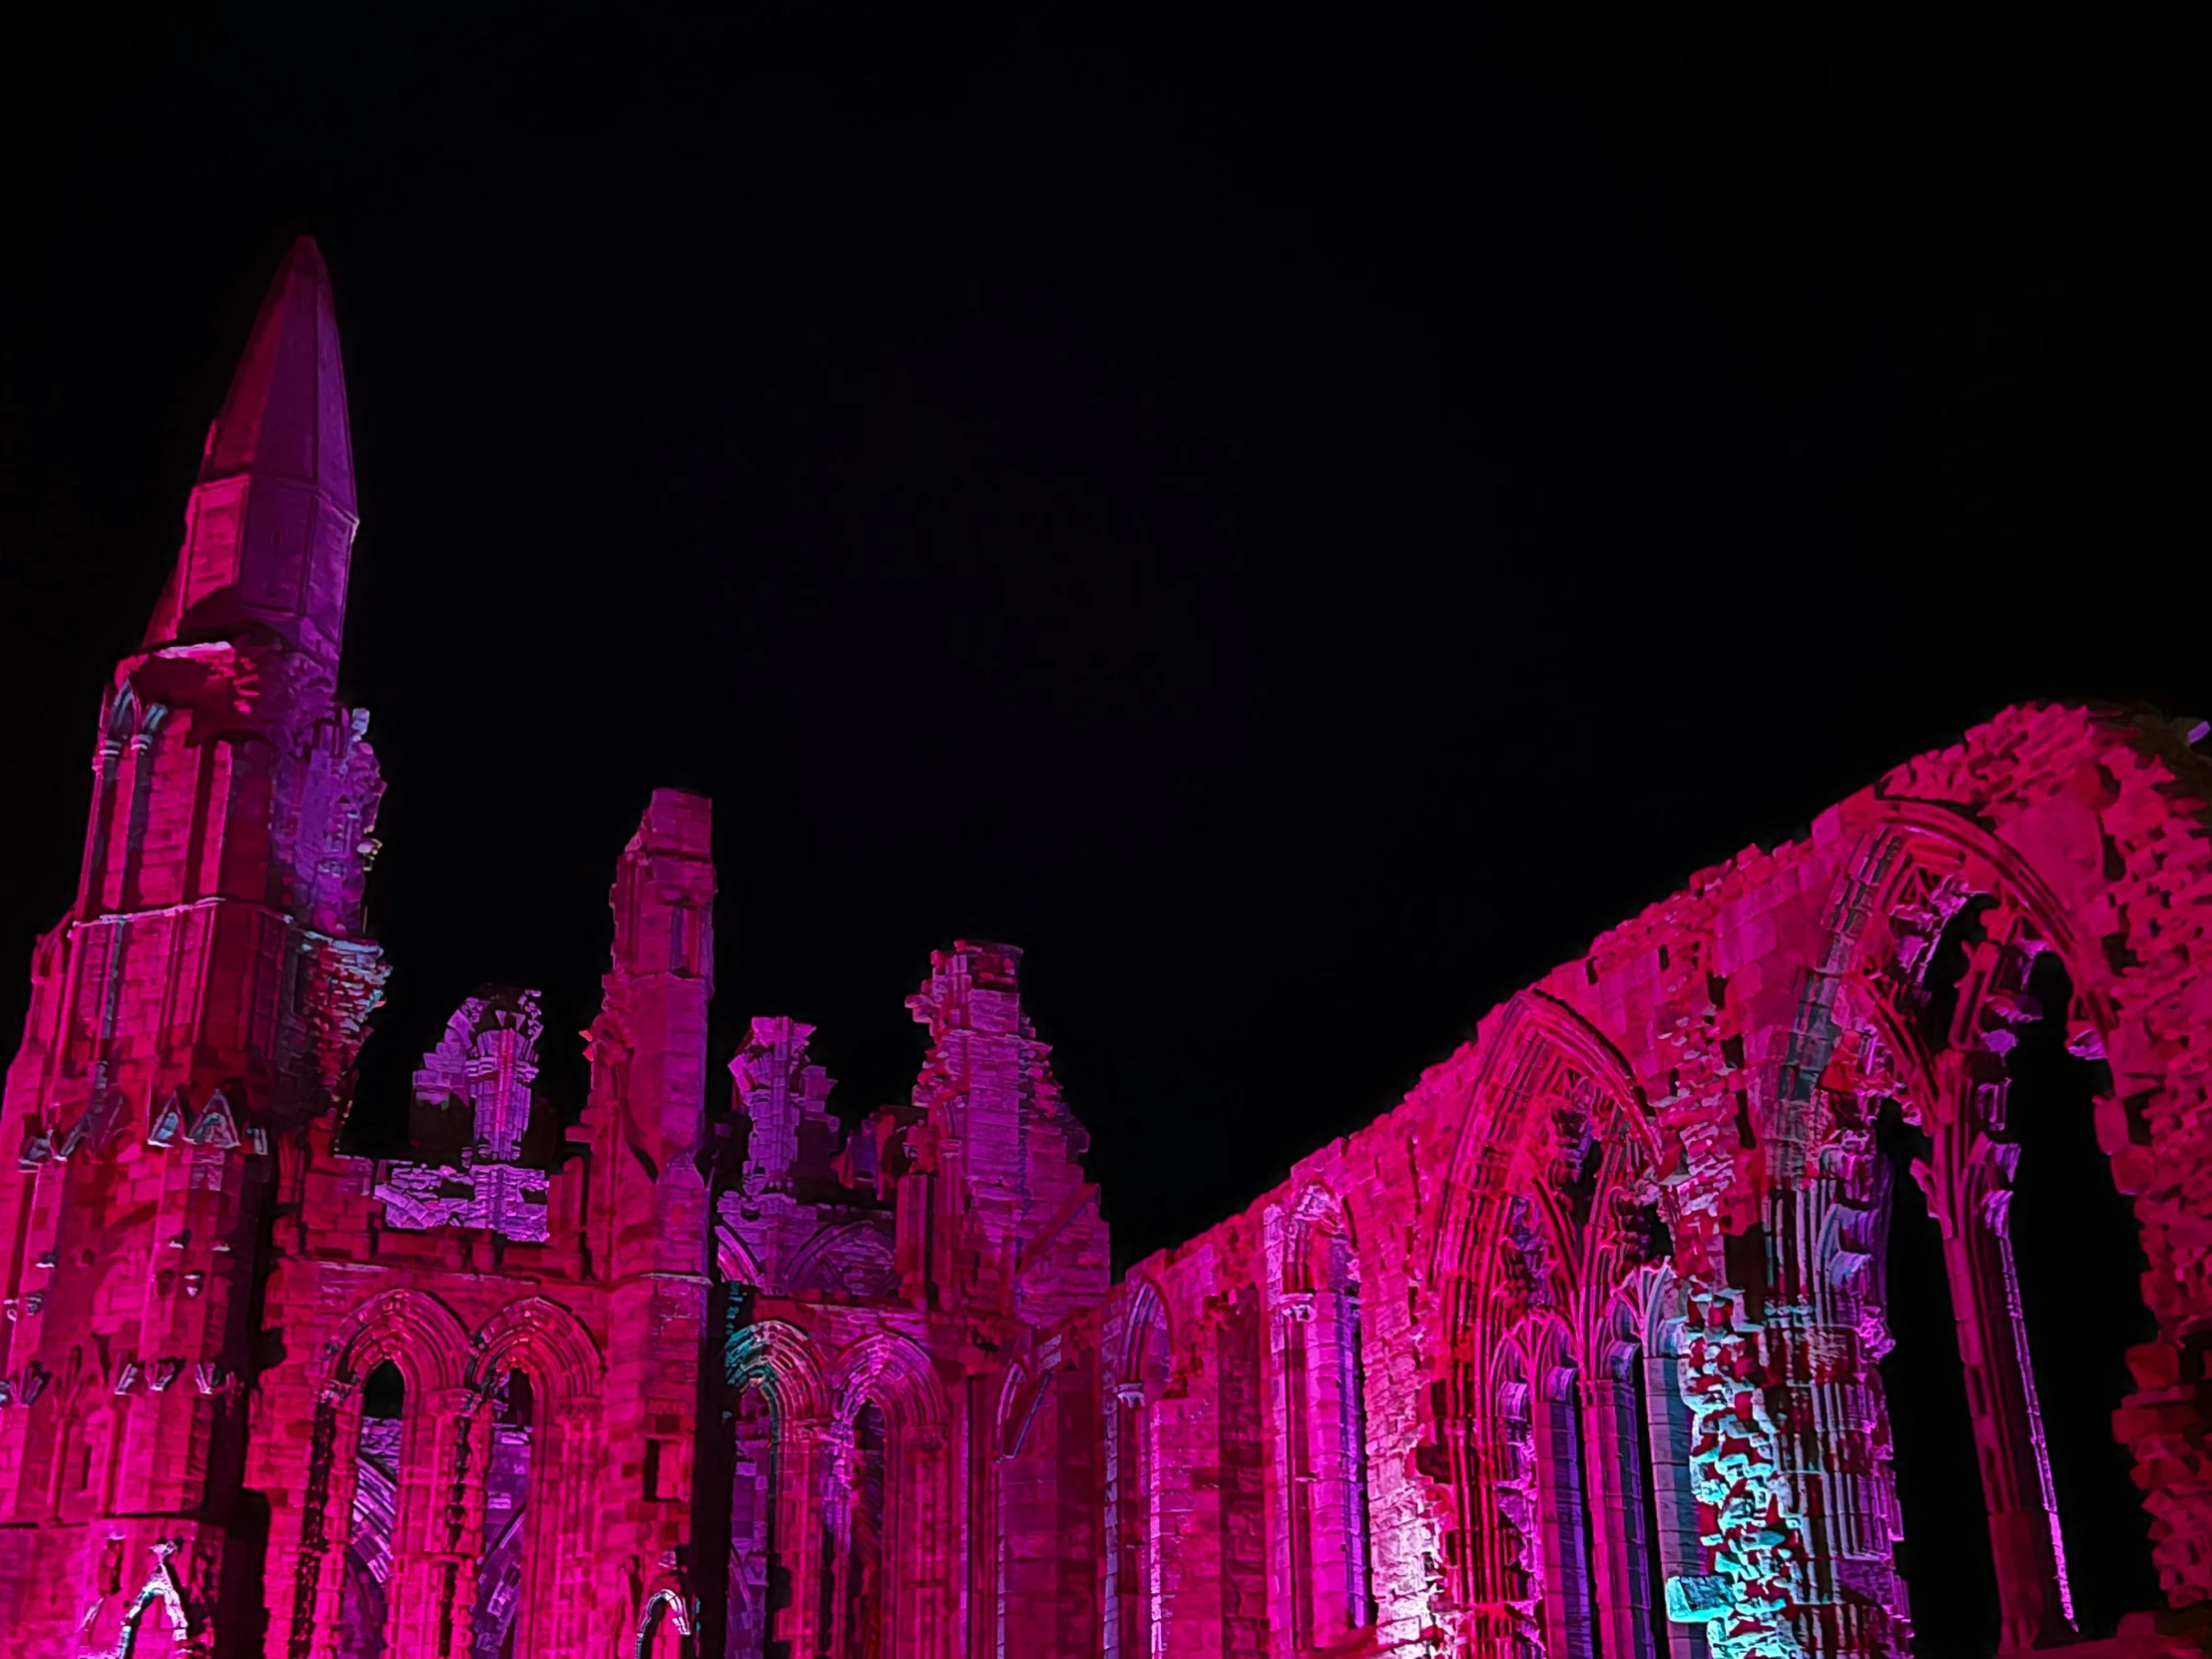 pink and purple lights illuminate the architectural structures of an old building